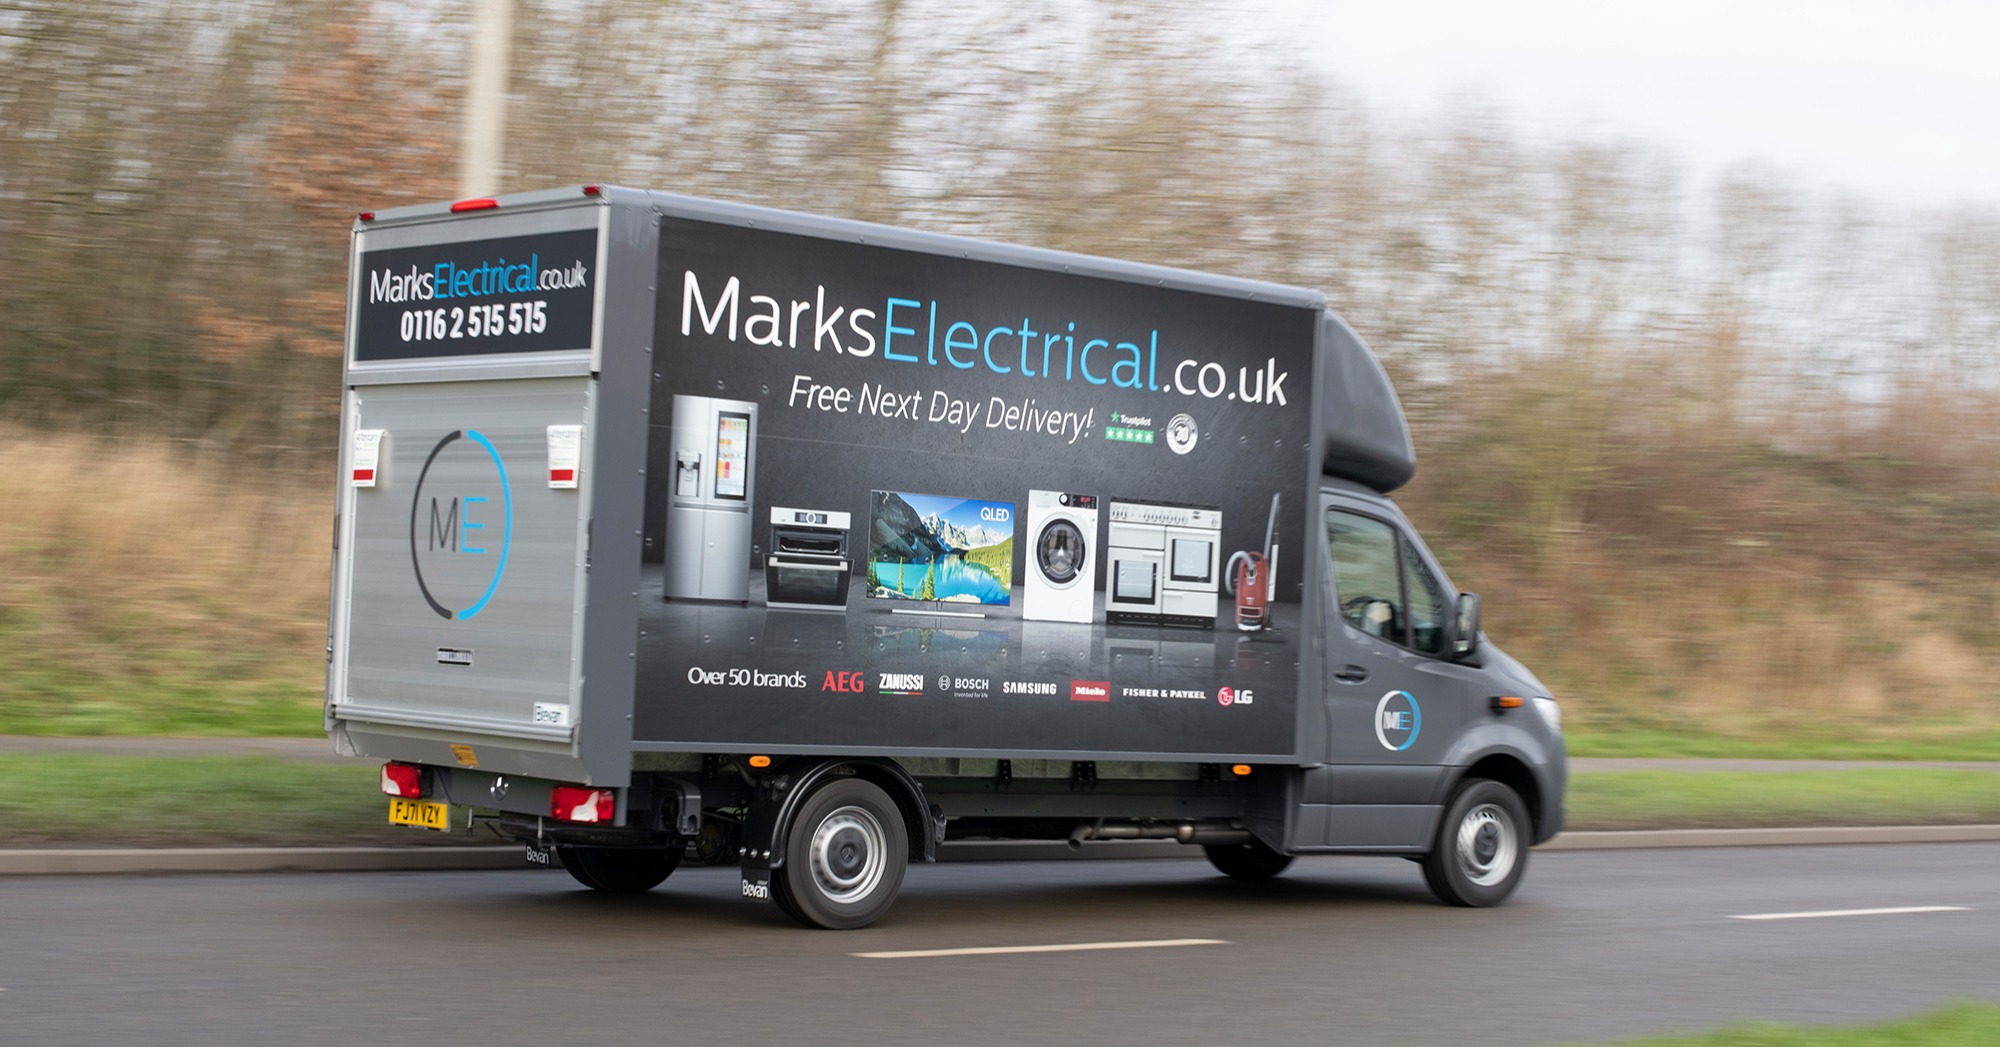 Marks Electrical - lighting the touch paper (initiation of coverage)